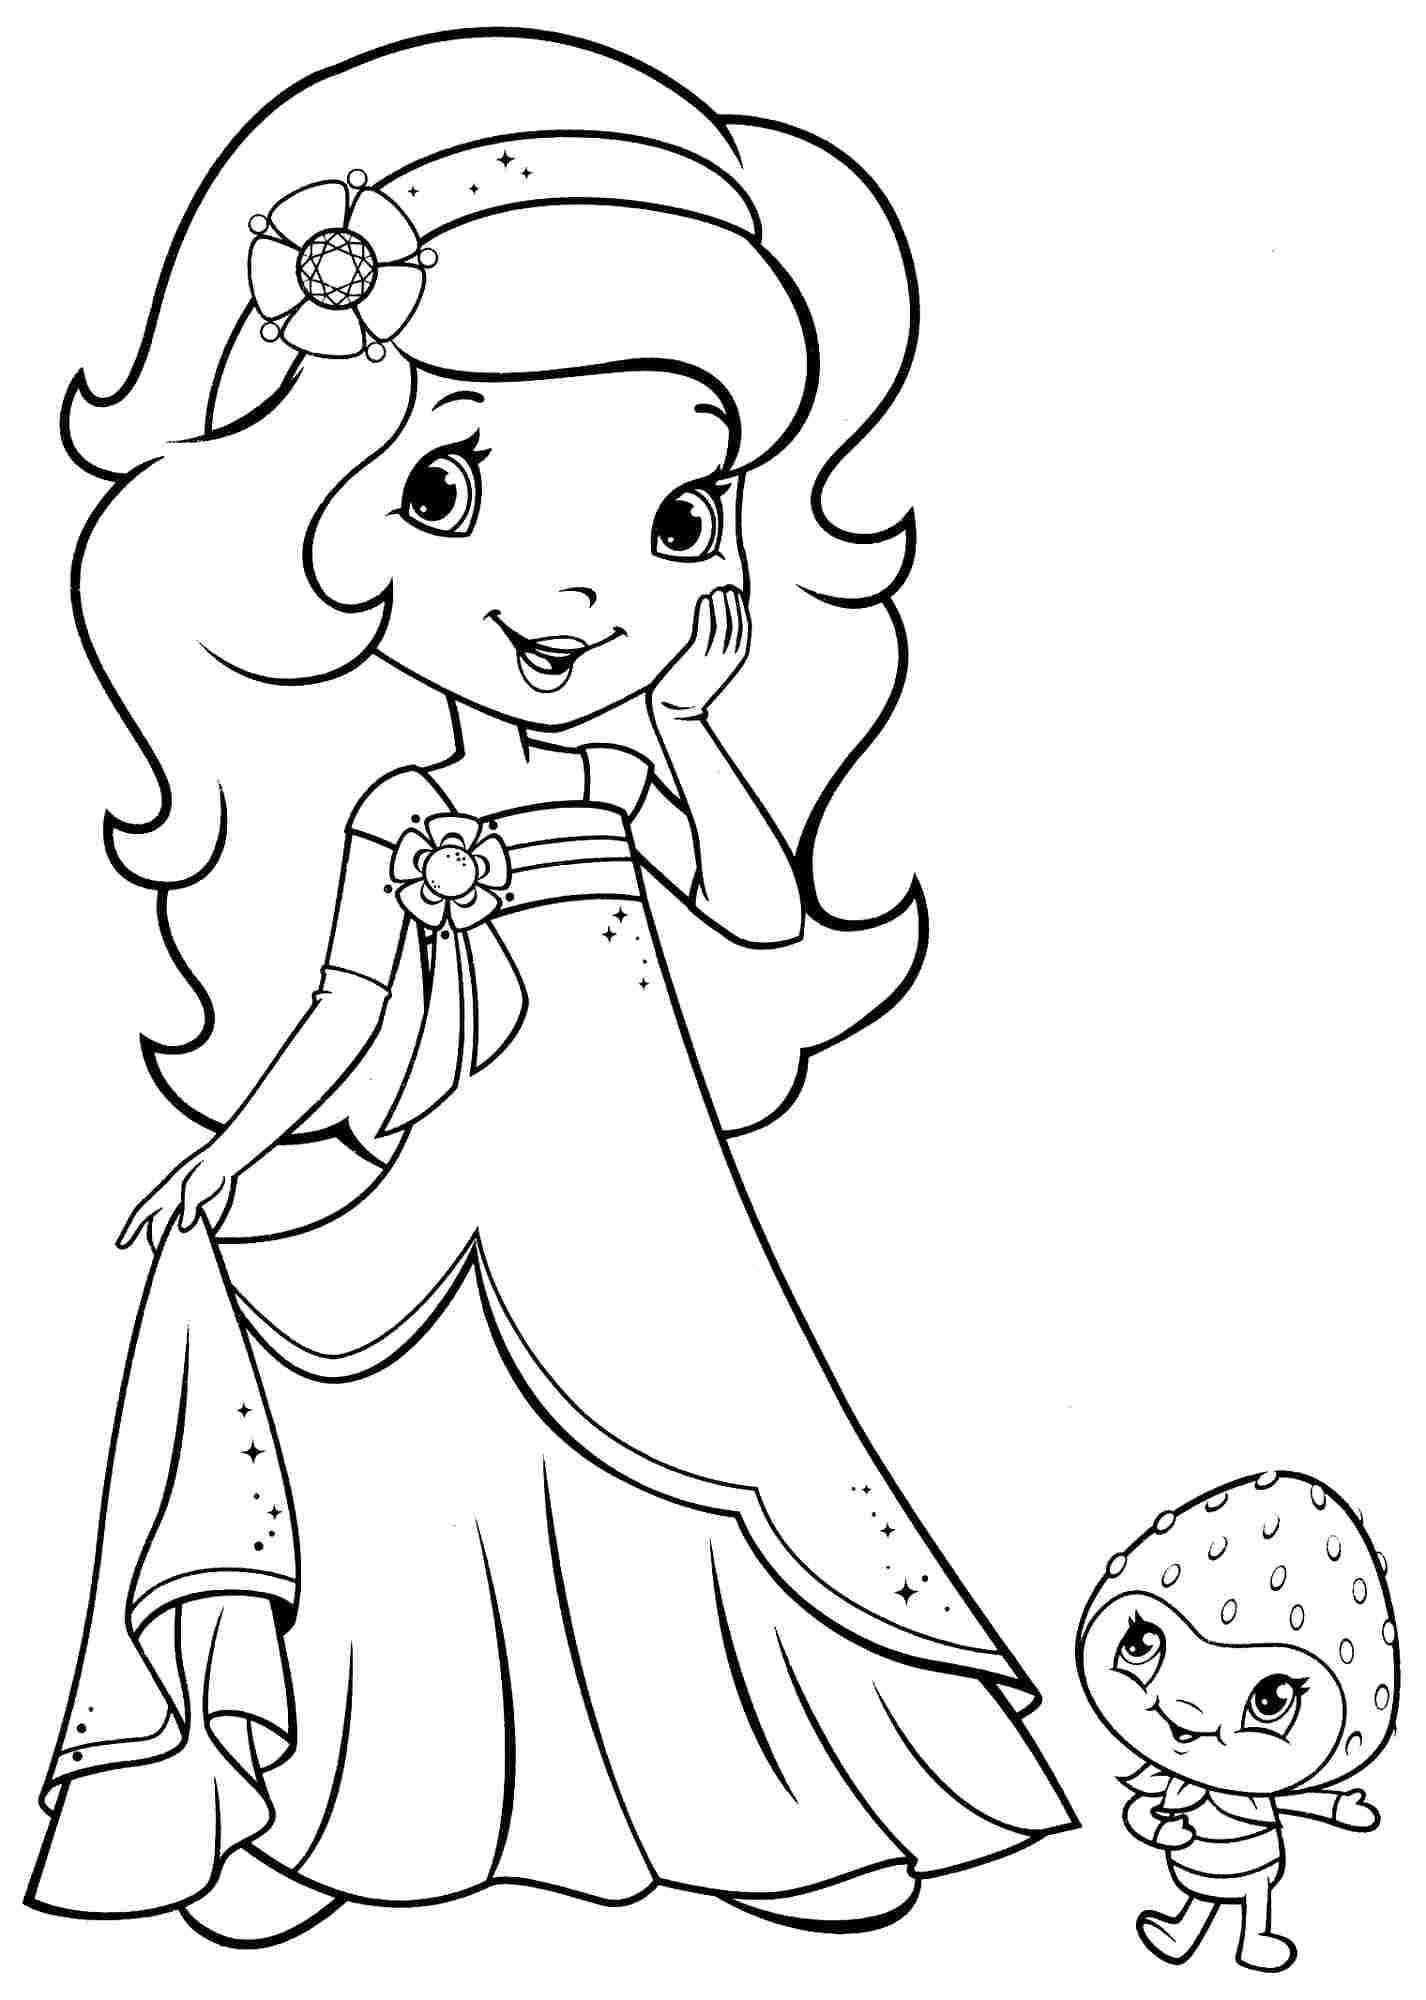 Arancina the friend of Strawberry Shortcake coloring page